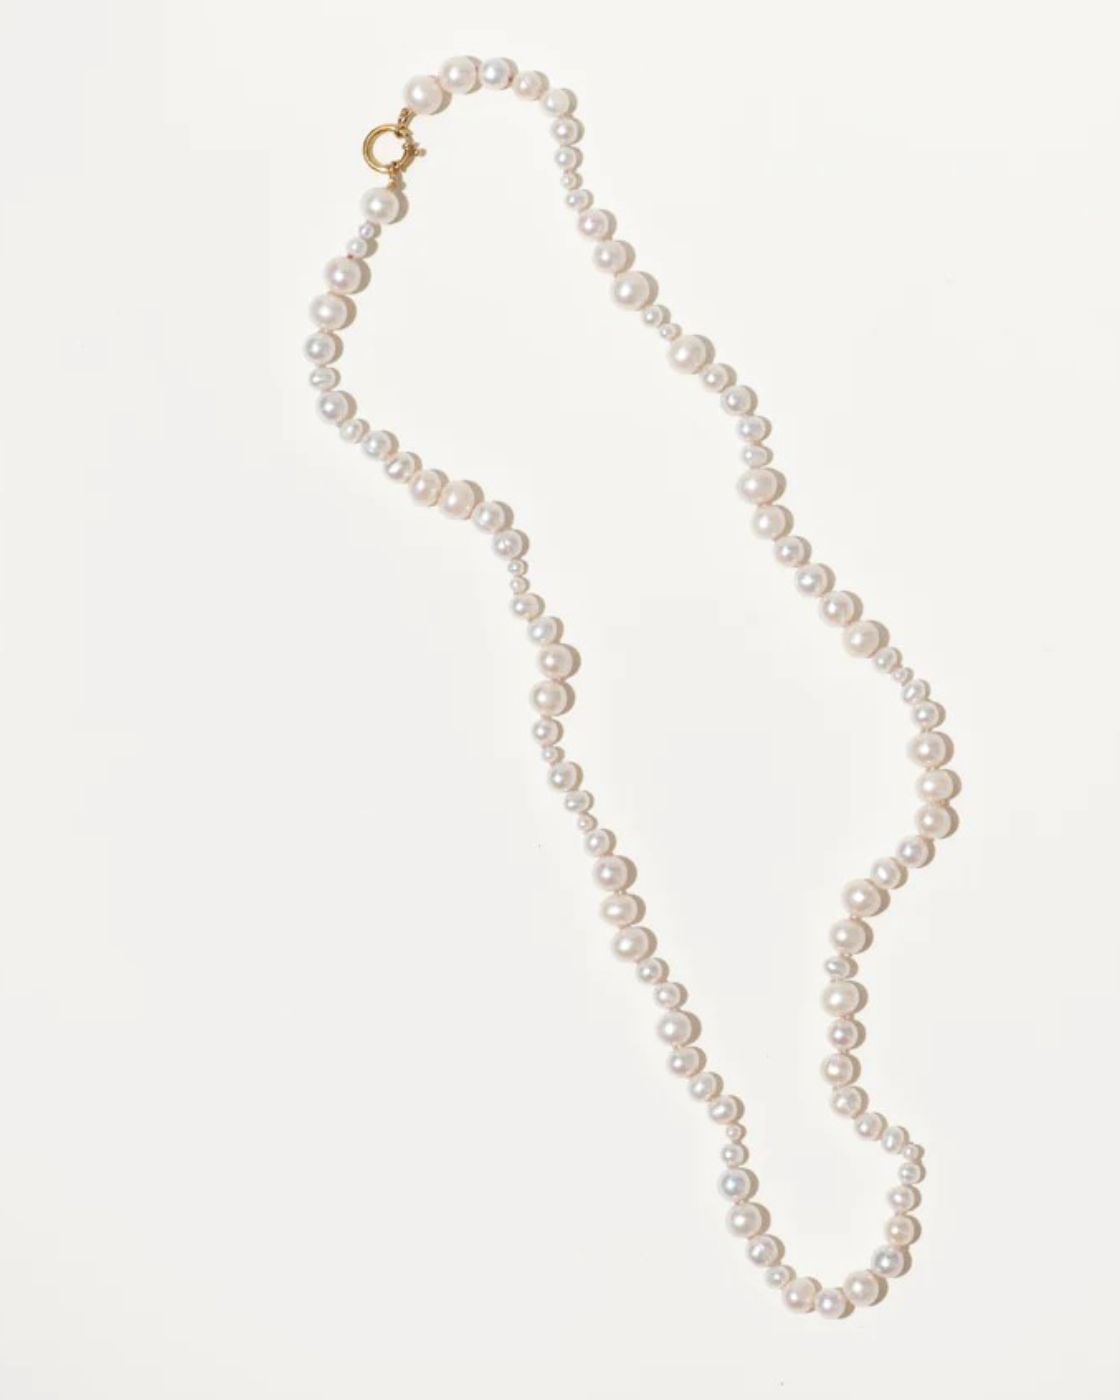 The Pearl Variation Necklace - Long